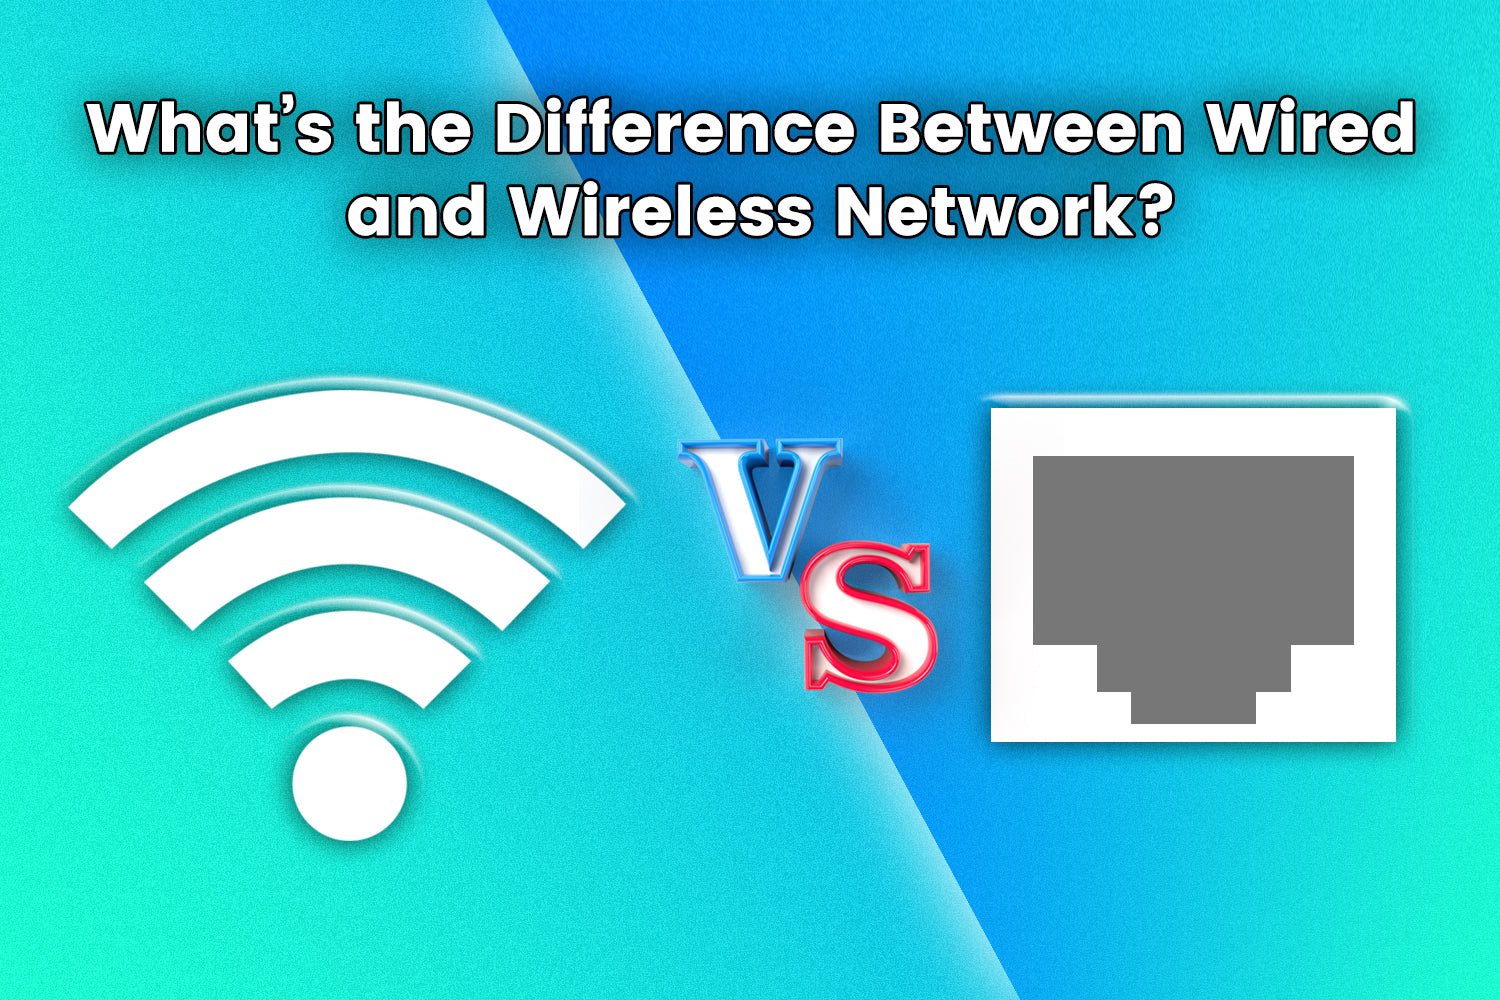 WiFi vs Ethernet – What's the difference?